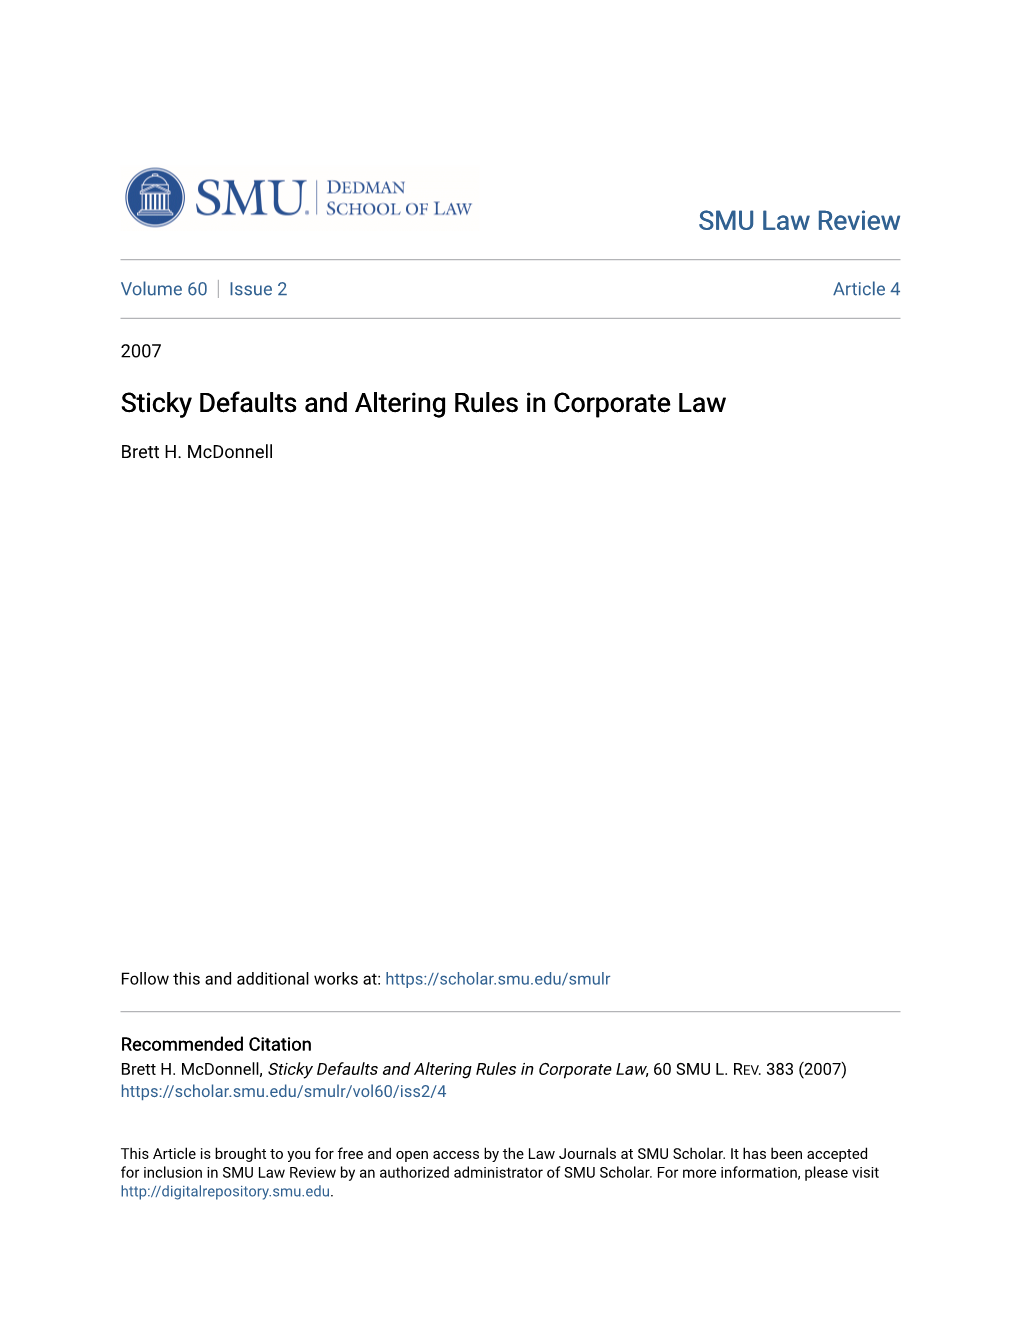 Sticky Defaults and Altering Rules in Corporate Law